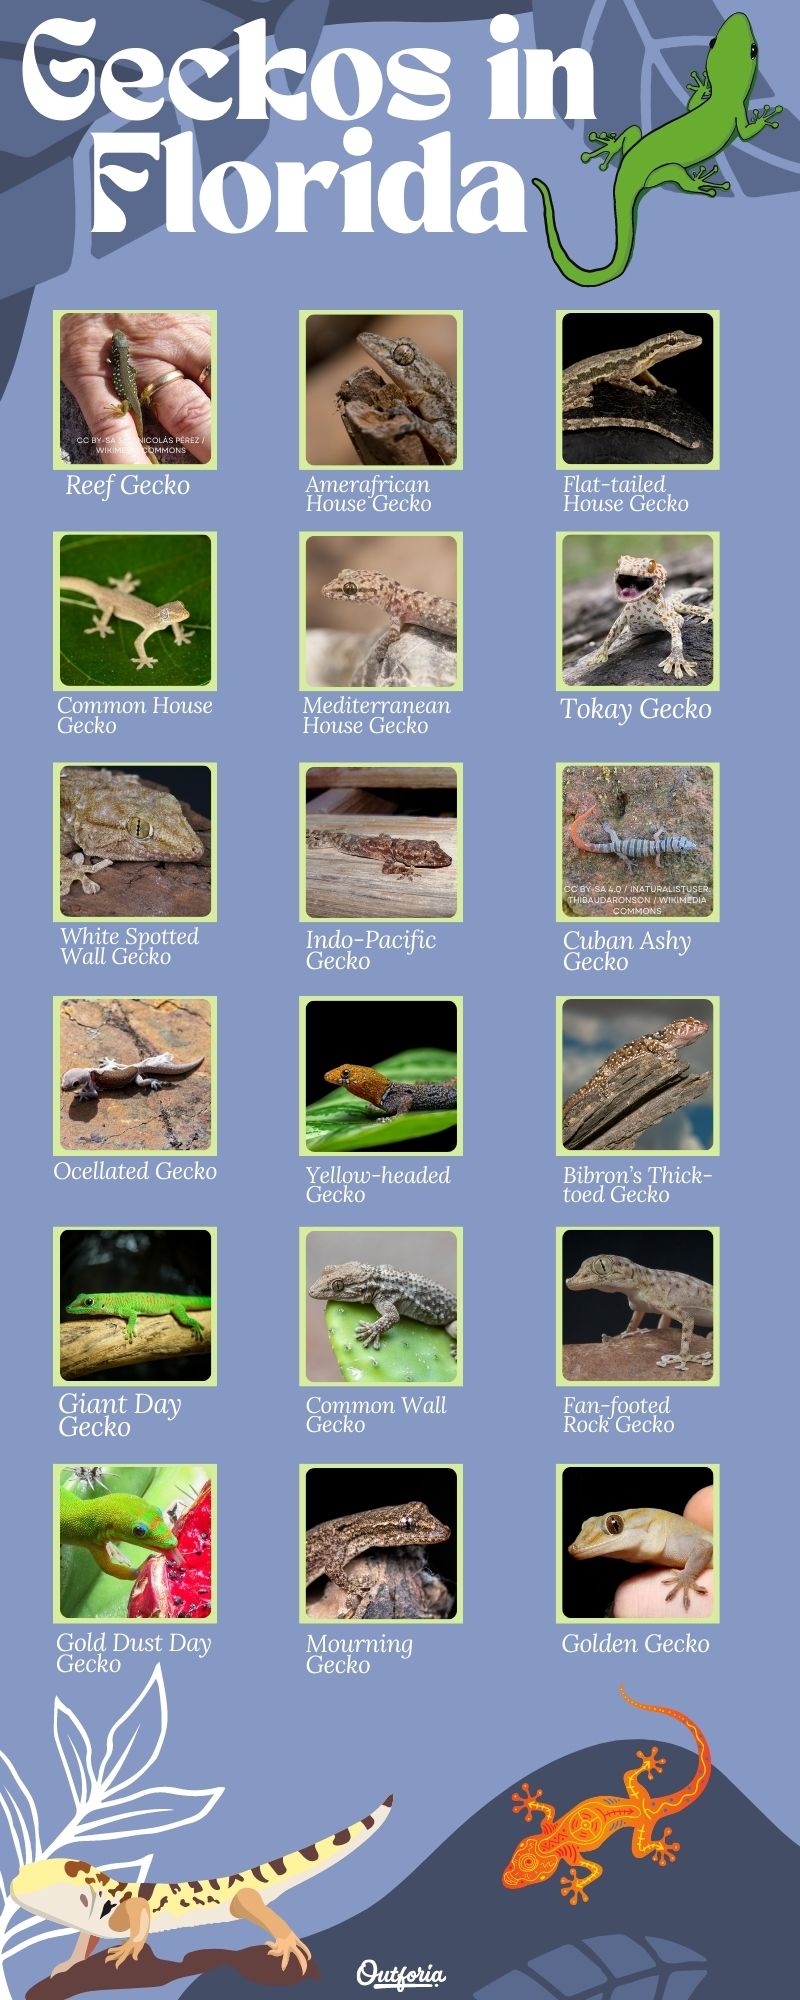 Chart about Geckos in Florida complete with Photos, Facts, and more